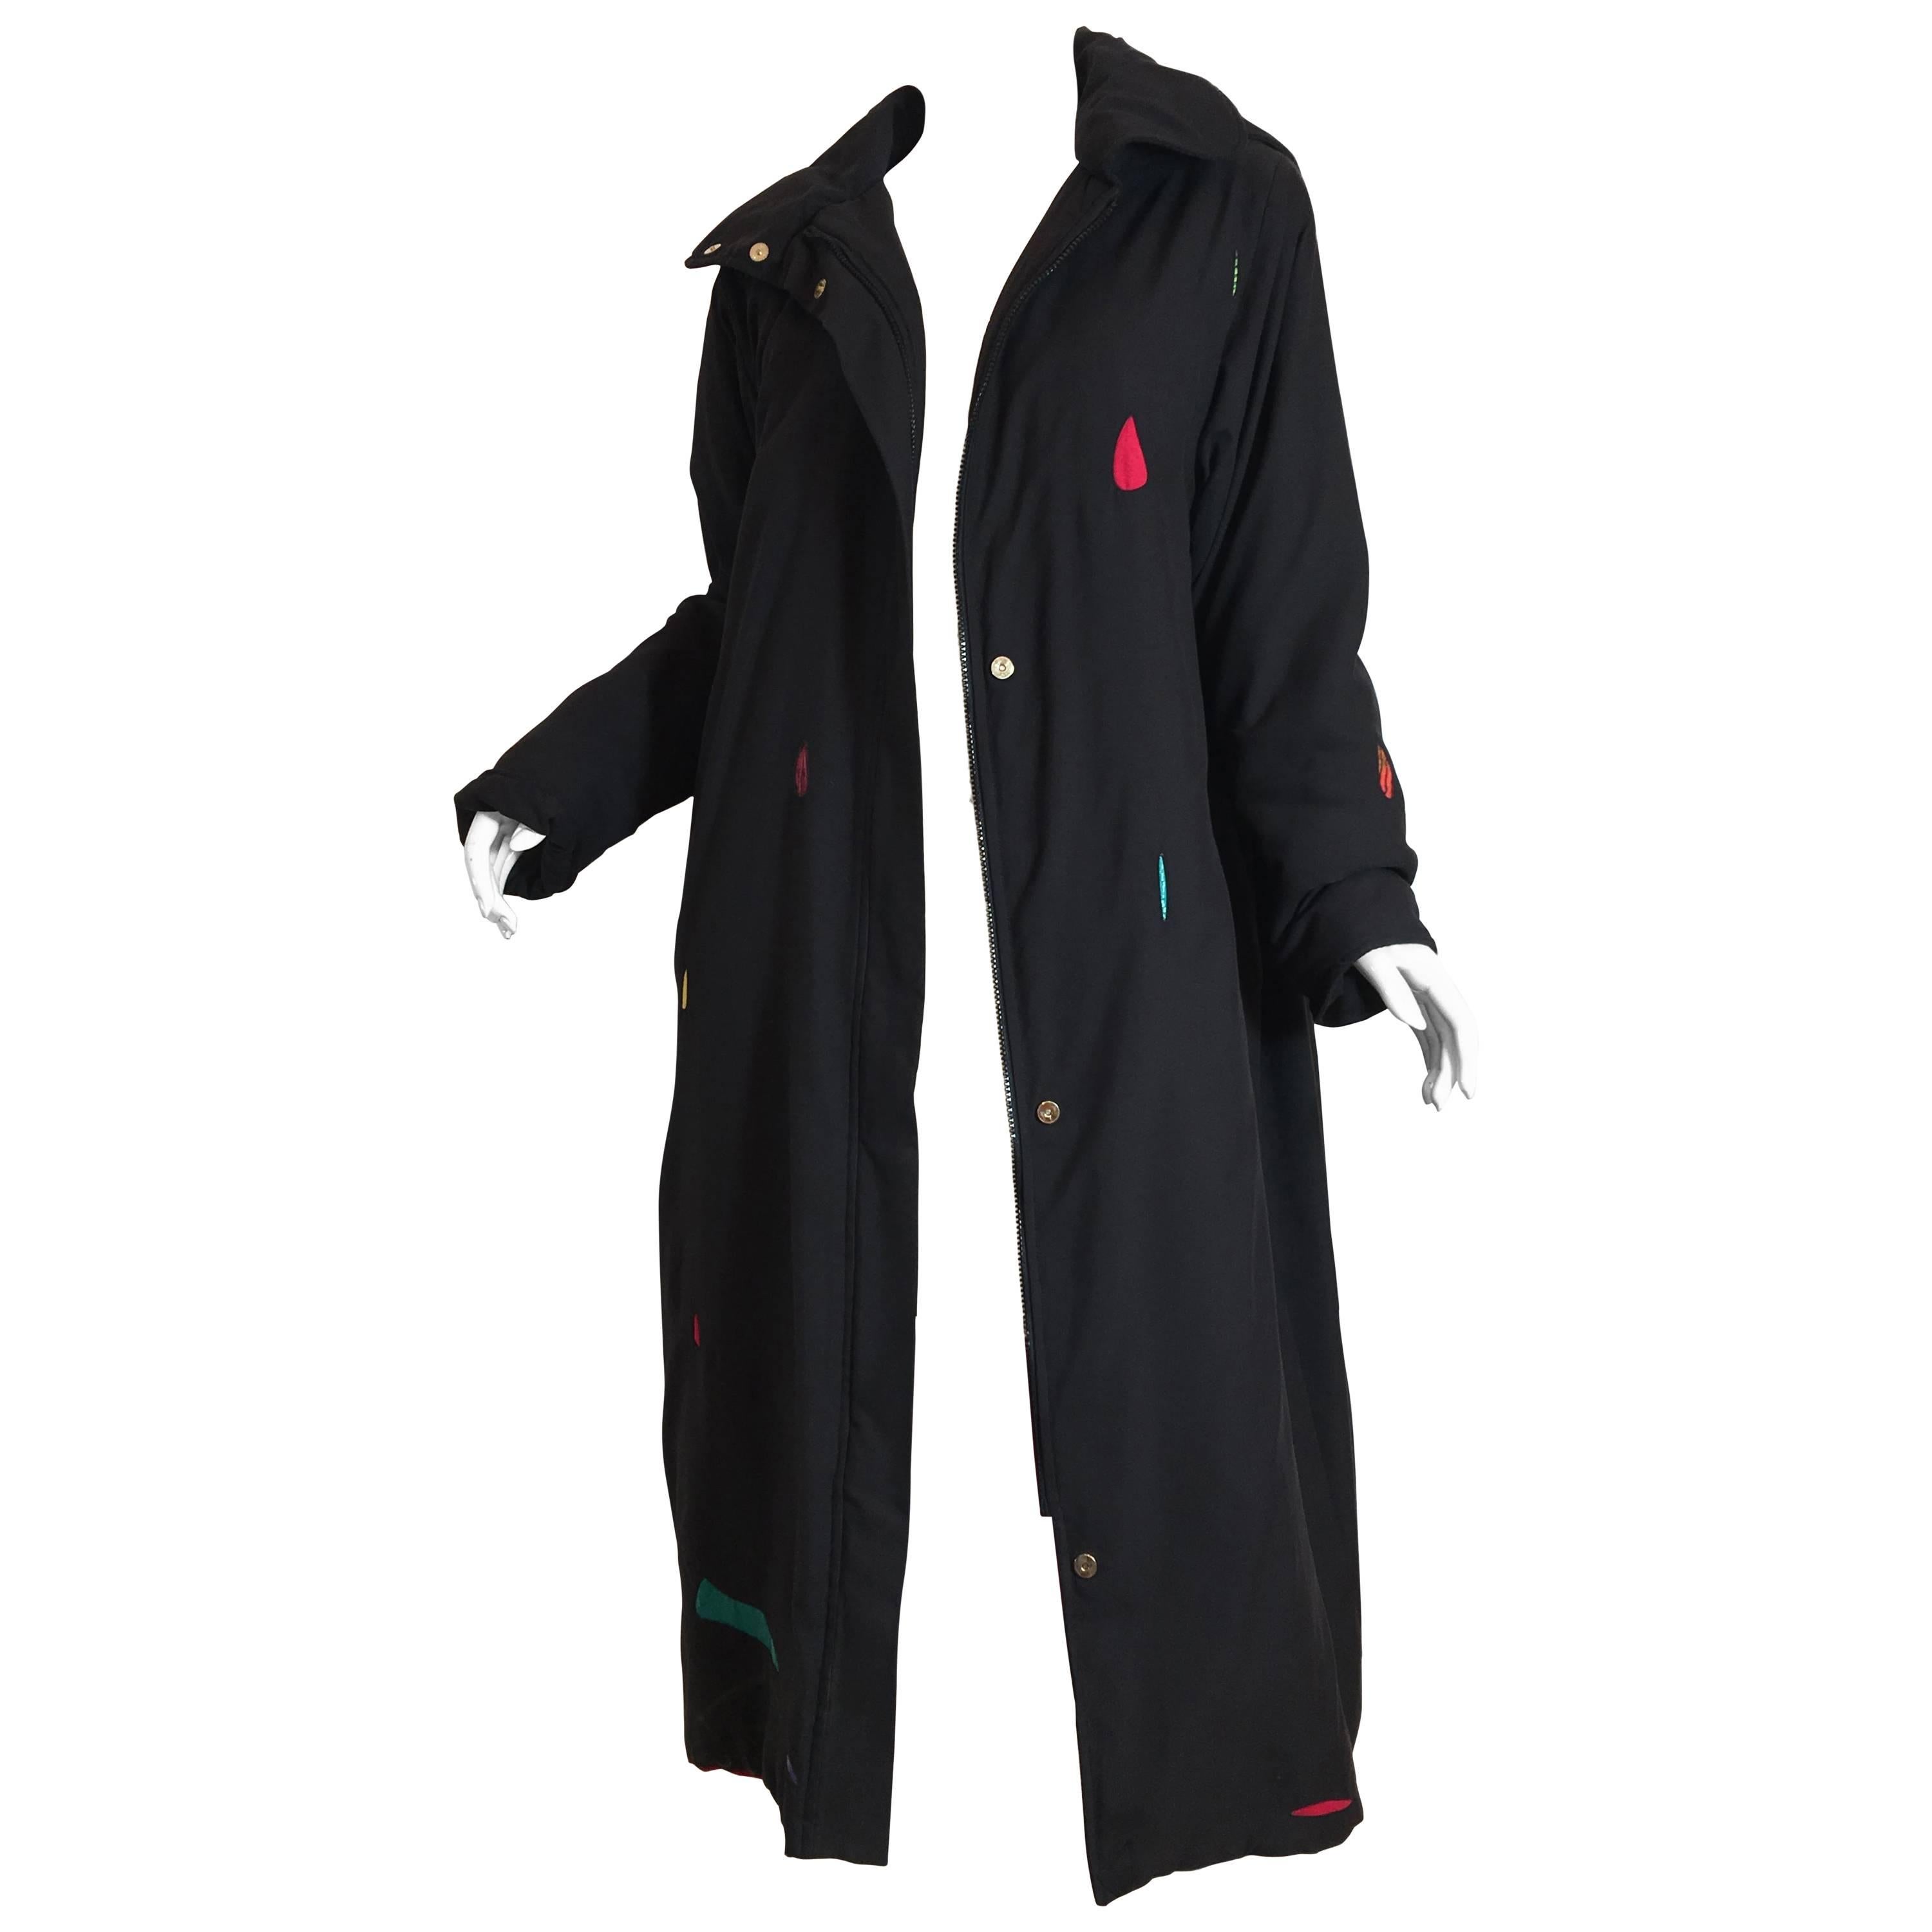 Jeffrey Weiss Limited Edition Coat